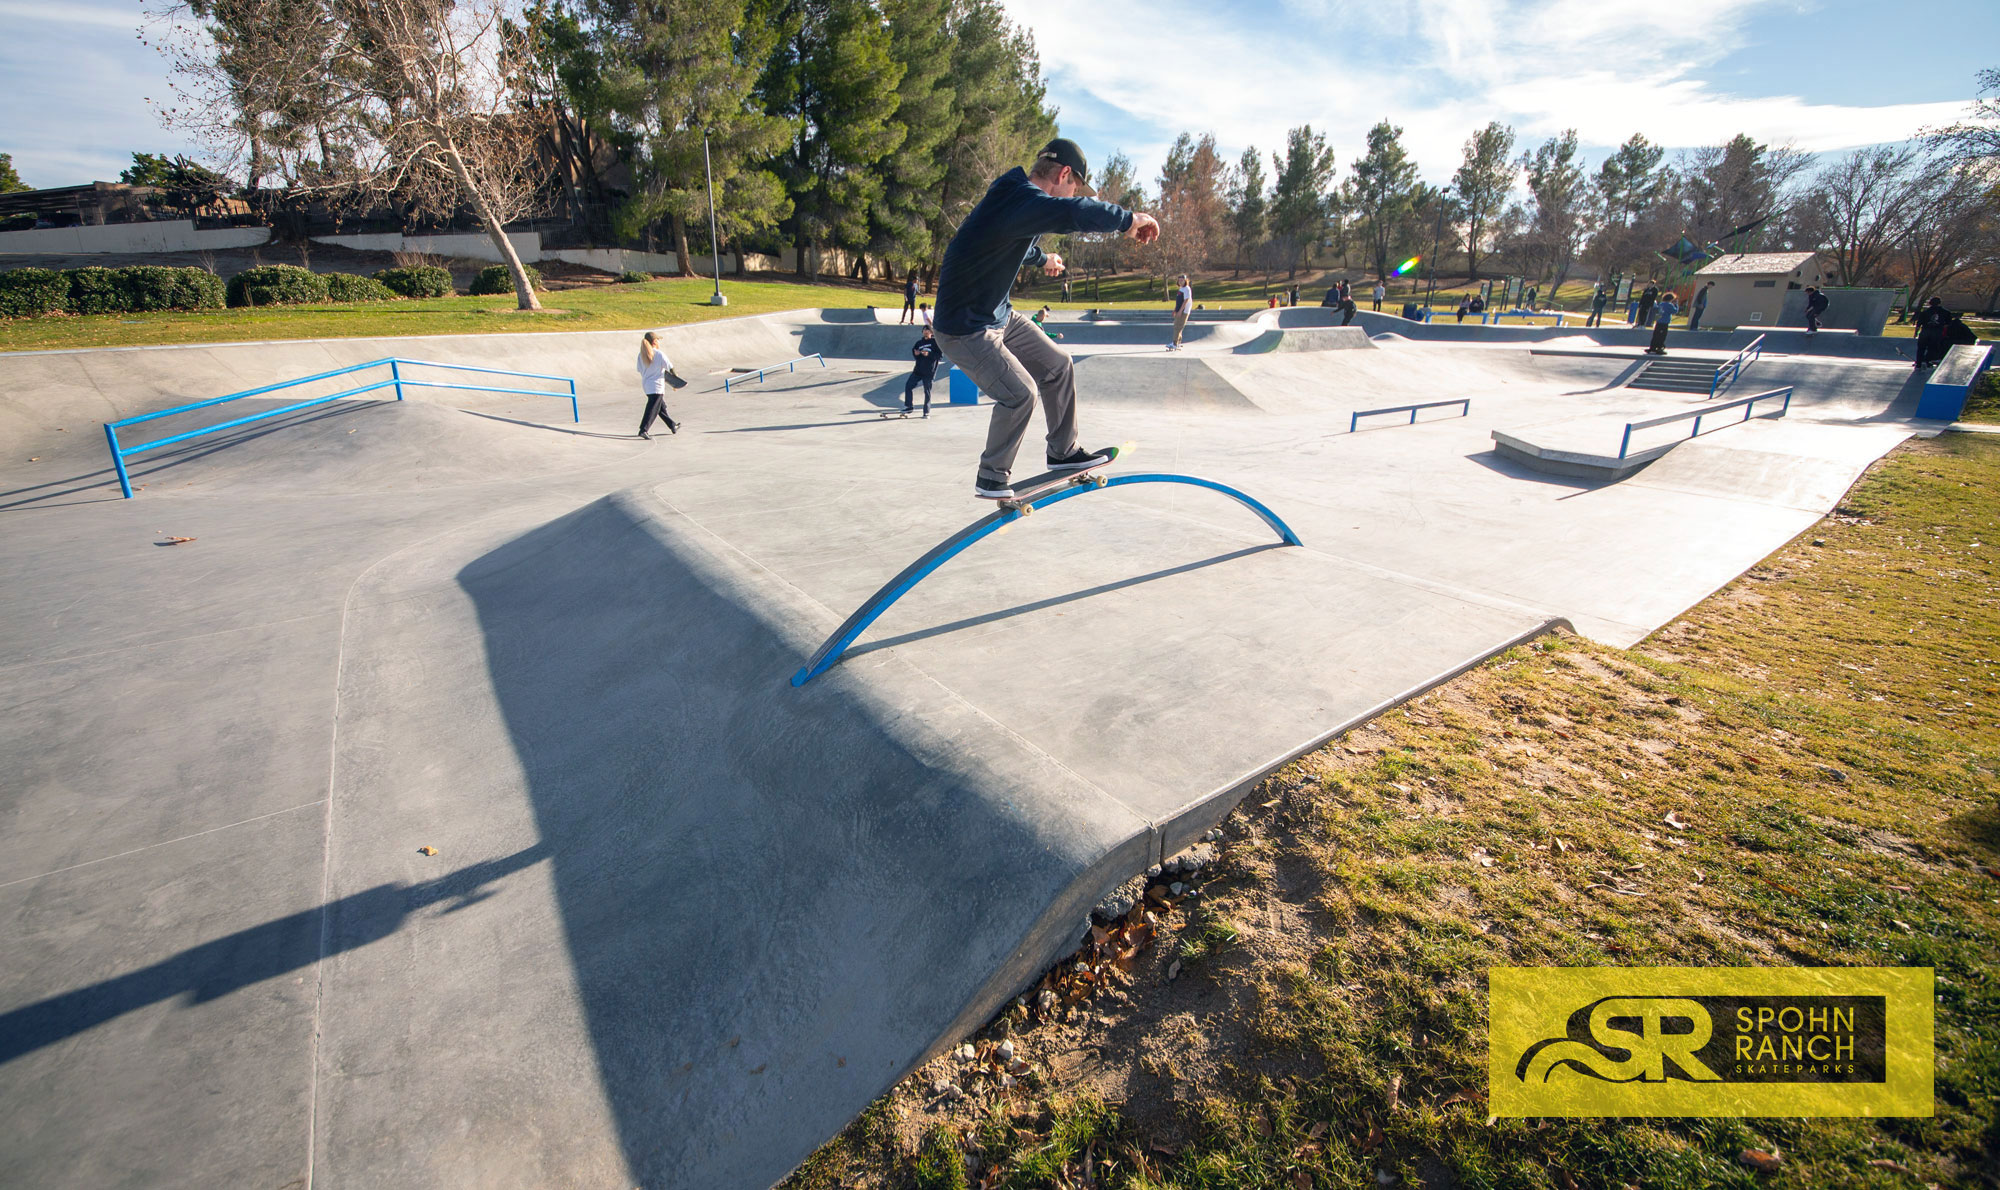 Robby Hargreaves riding the rainbow rail at Victorville Skatepark in CA by designed by Spohn Ranch